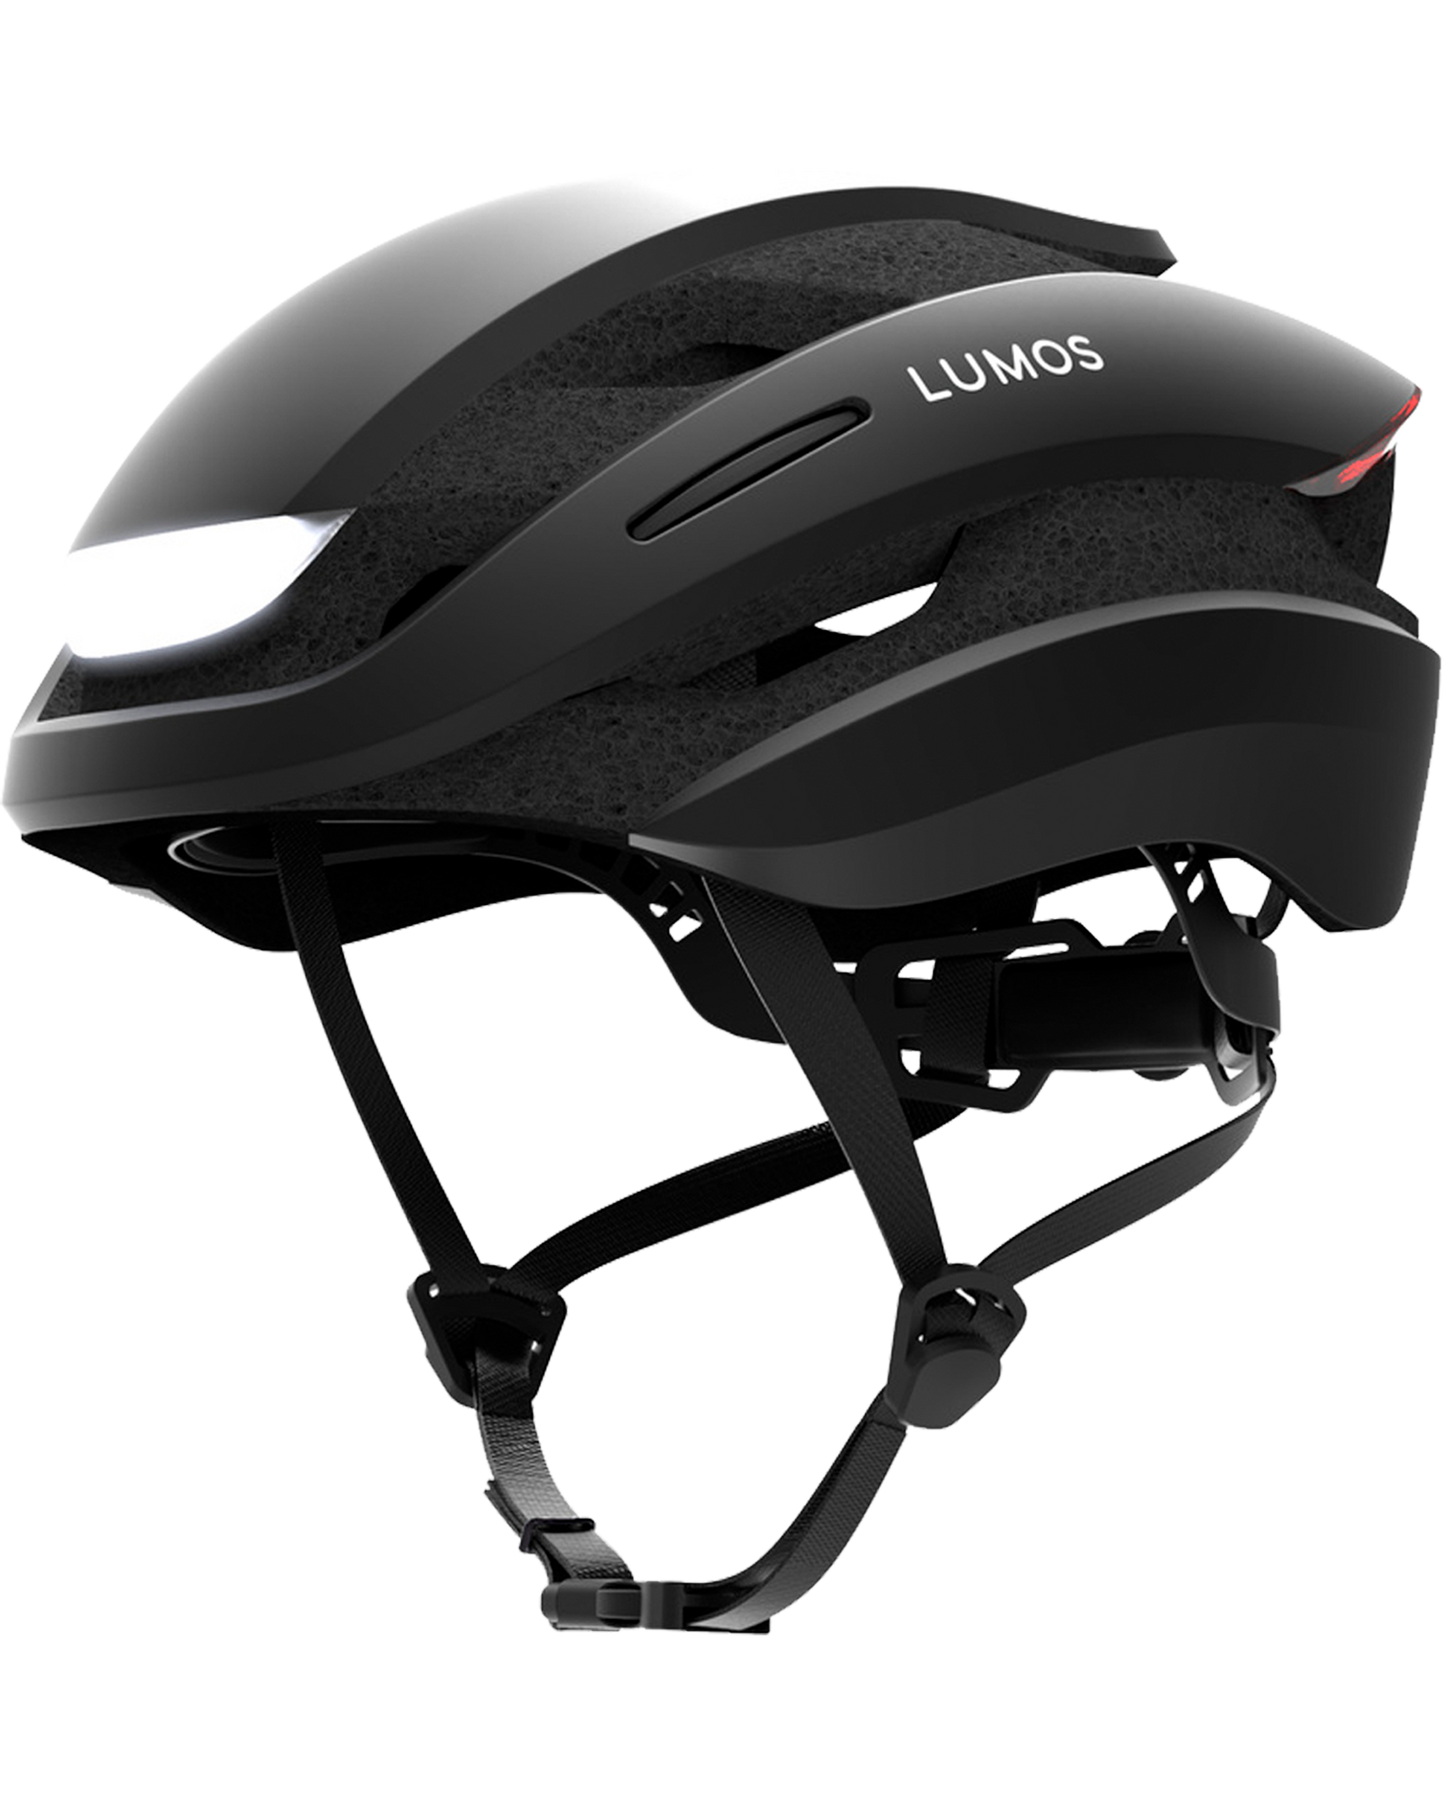 Lumos Ultra helmet for Segway-Ninebot electric kick scooter. Comes with remote control signalling that installs onto the handlebar. Built in lights and signals for enhanced safety and night riding. Protect your head while riding. Helmet in Black. Rechargeable.